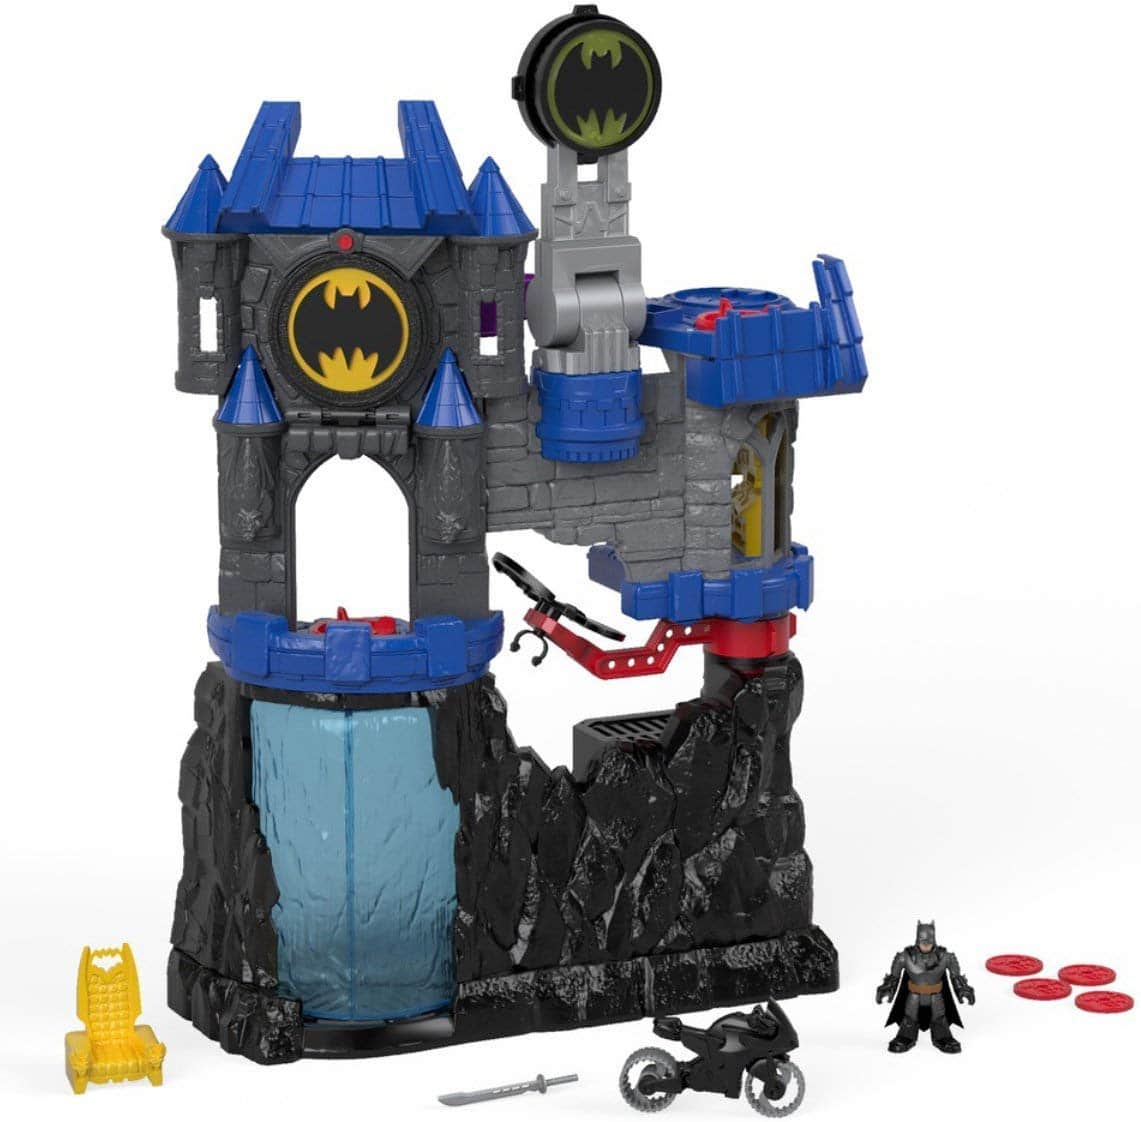 Fisher-Price Imaginext DC Super Friends, Wayne Manor Batcave - Top Toys and Gifts for Four Year Old Boys 1